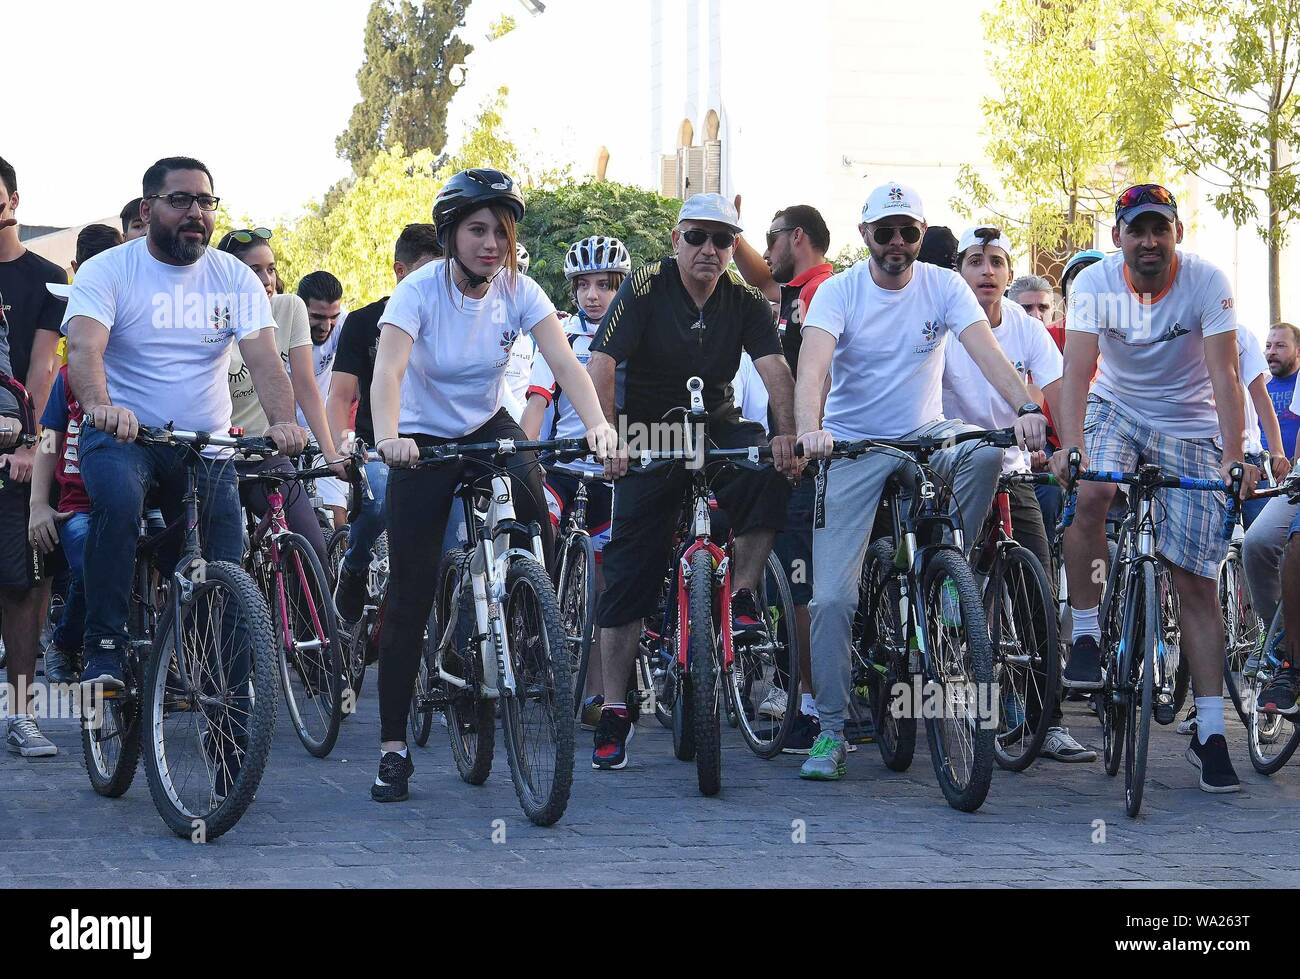 Damascus, Syria. 16th Aug, 2019. Syrians take part in a cycling event in Damascus, Syria, on Aug. 16, 2019. The event aims to raise awareness of protecting the environment. Credit: Ammar Safarjalani/Xinhua Stock Photo